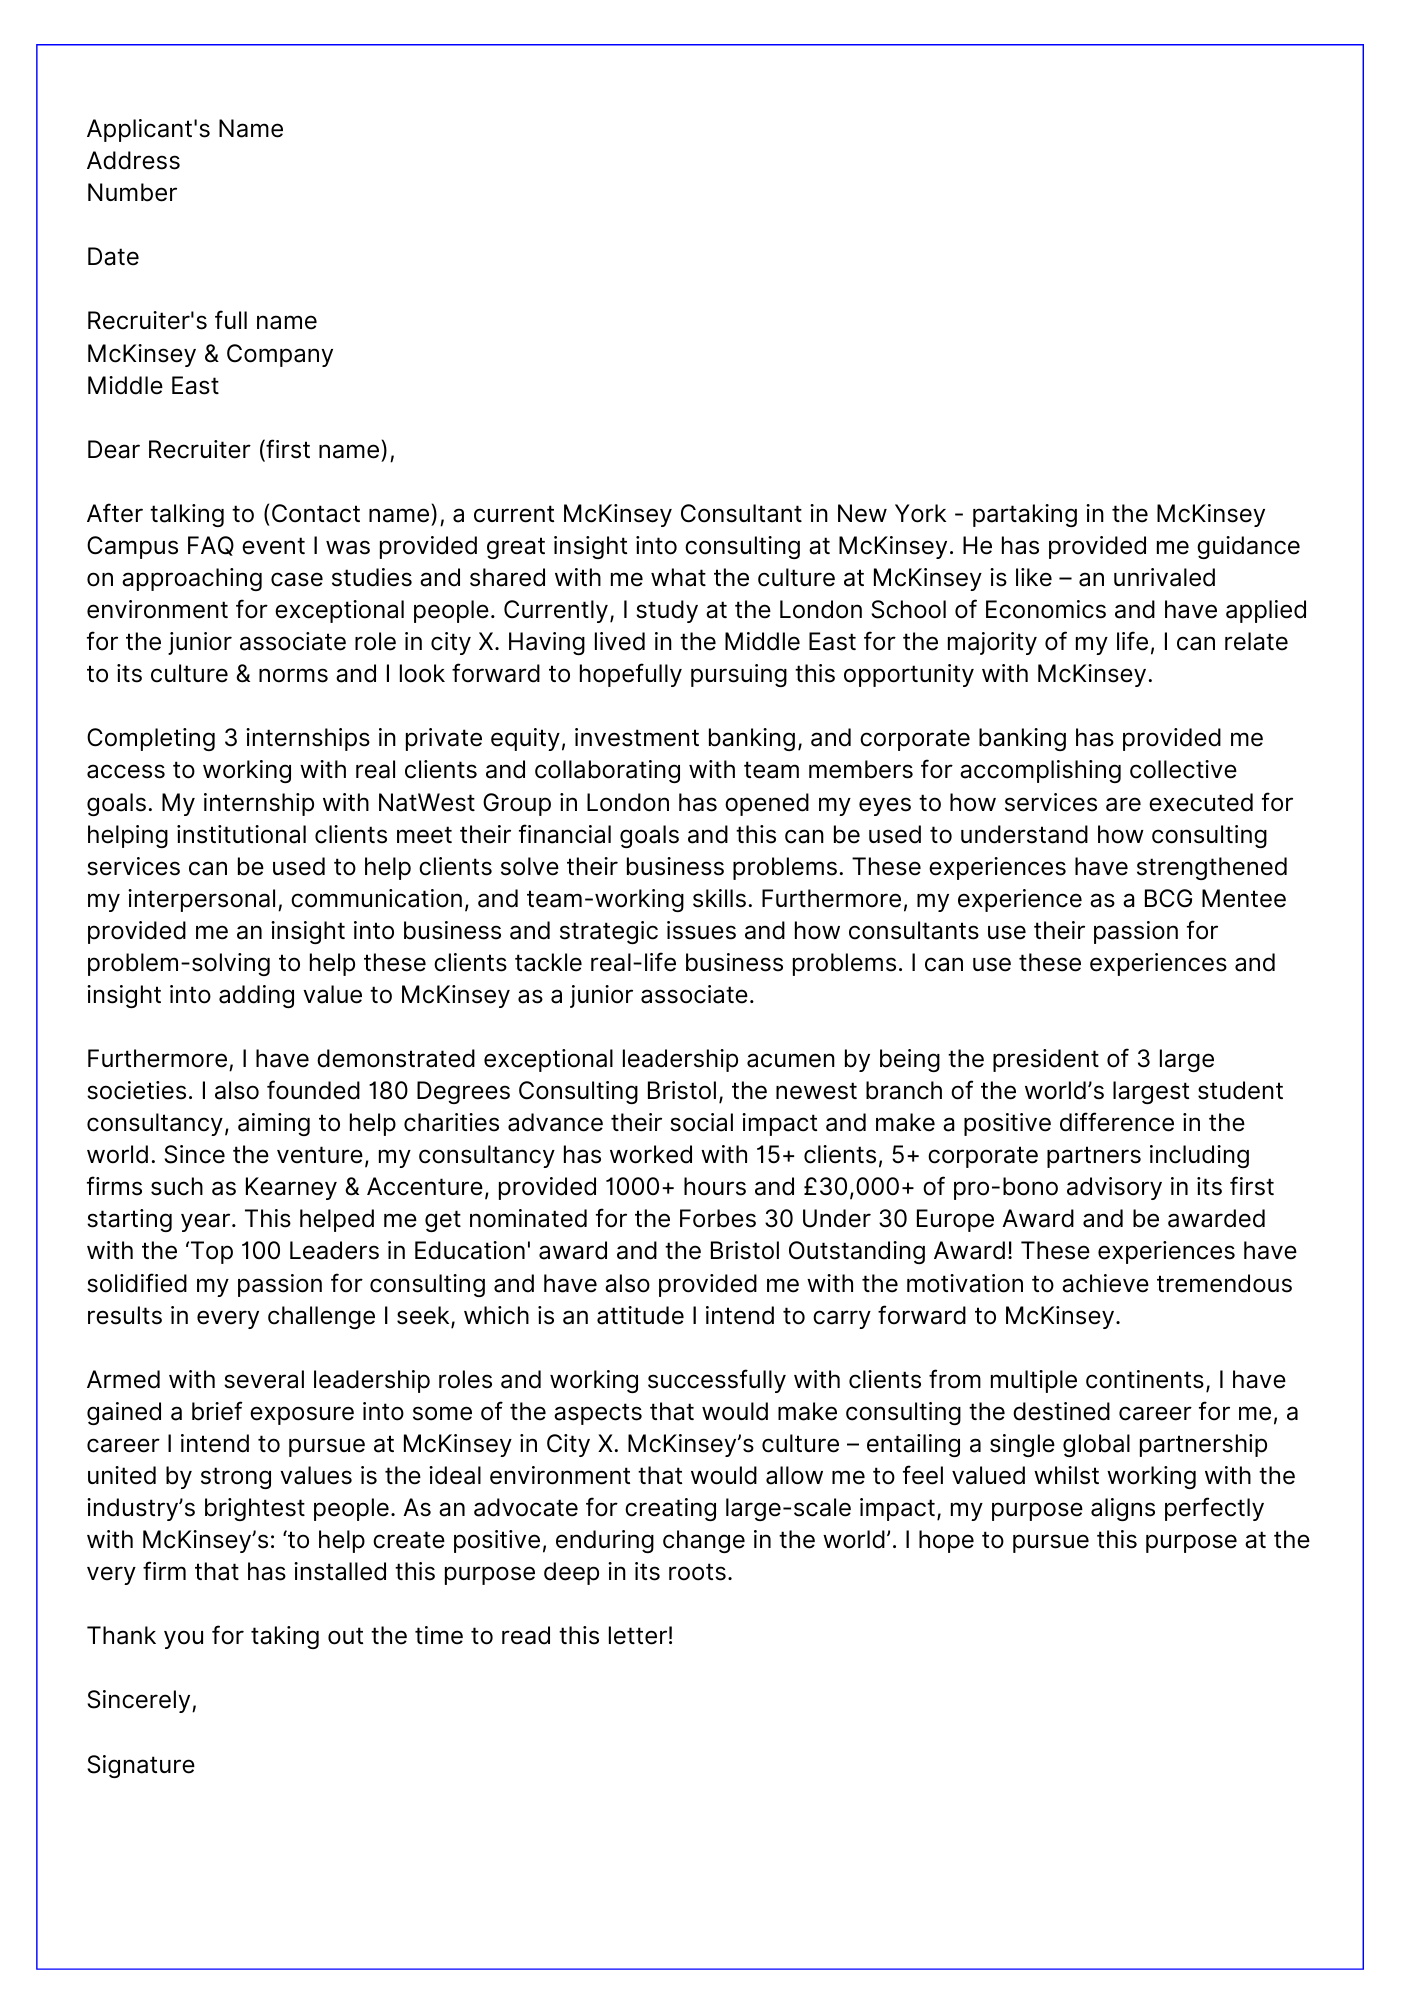 McKinsey cover letter